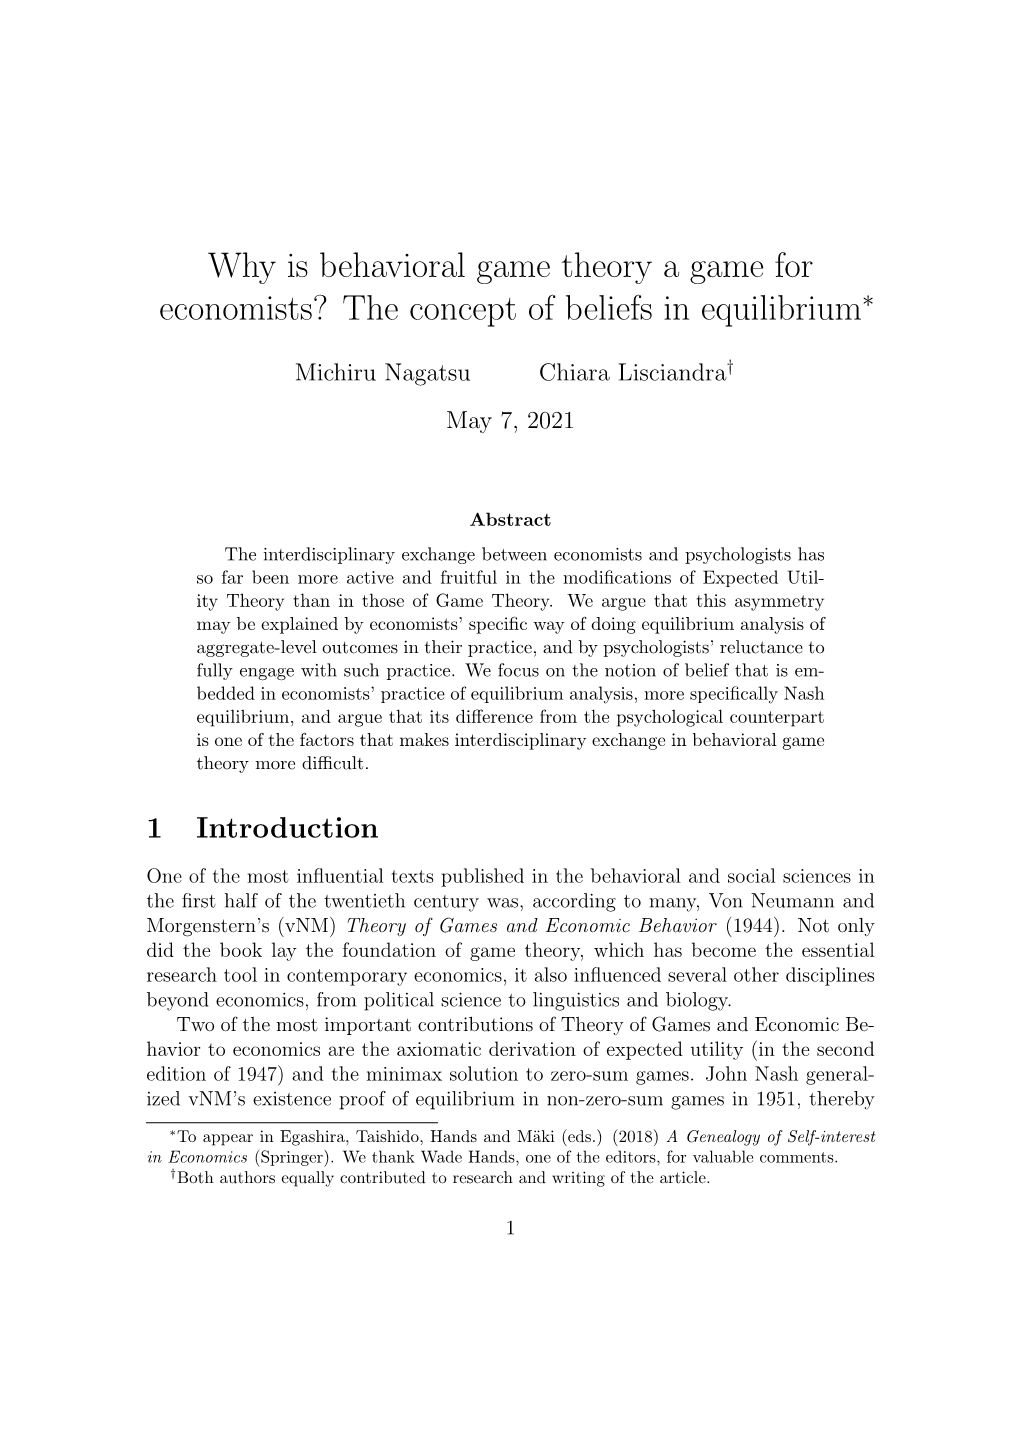 Why Is Behavioral Game Theory a Game for Economists? the Concept of Beliefs in Equilibrium∗